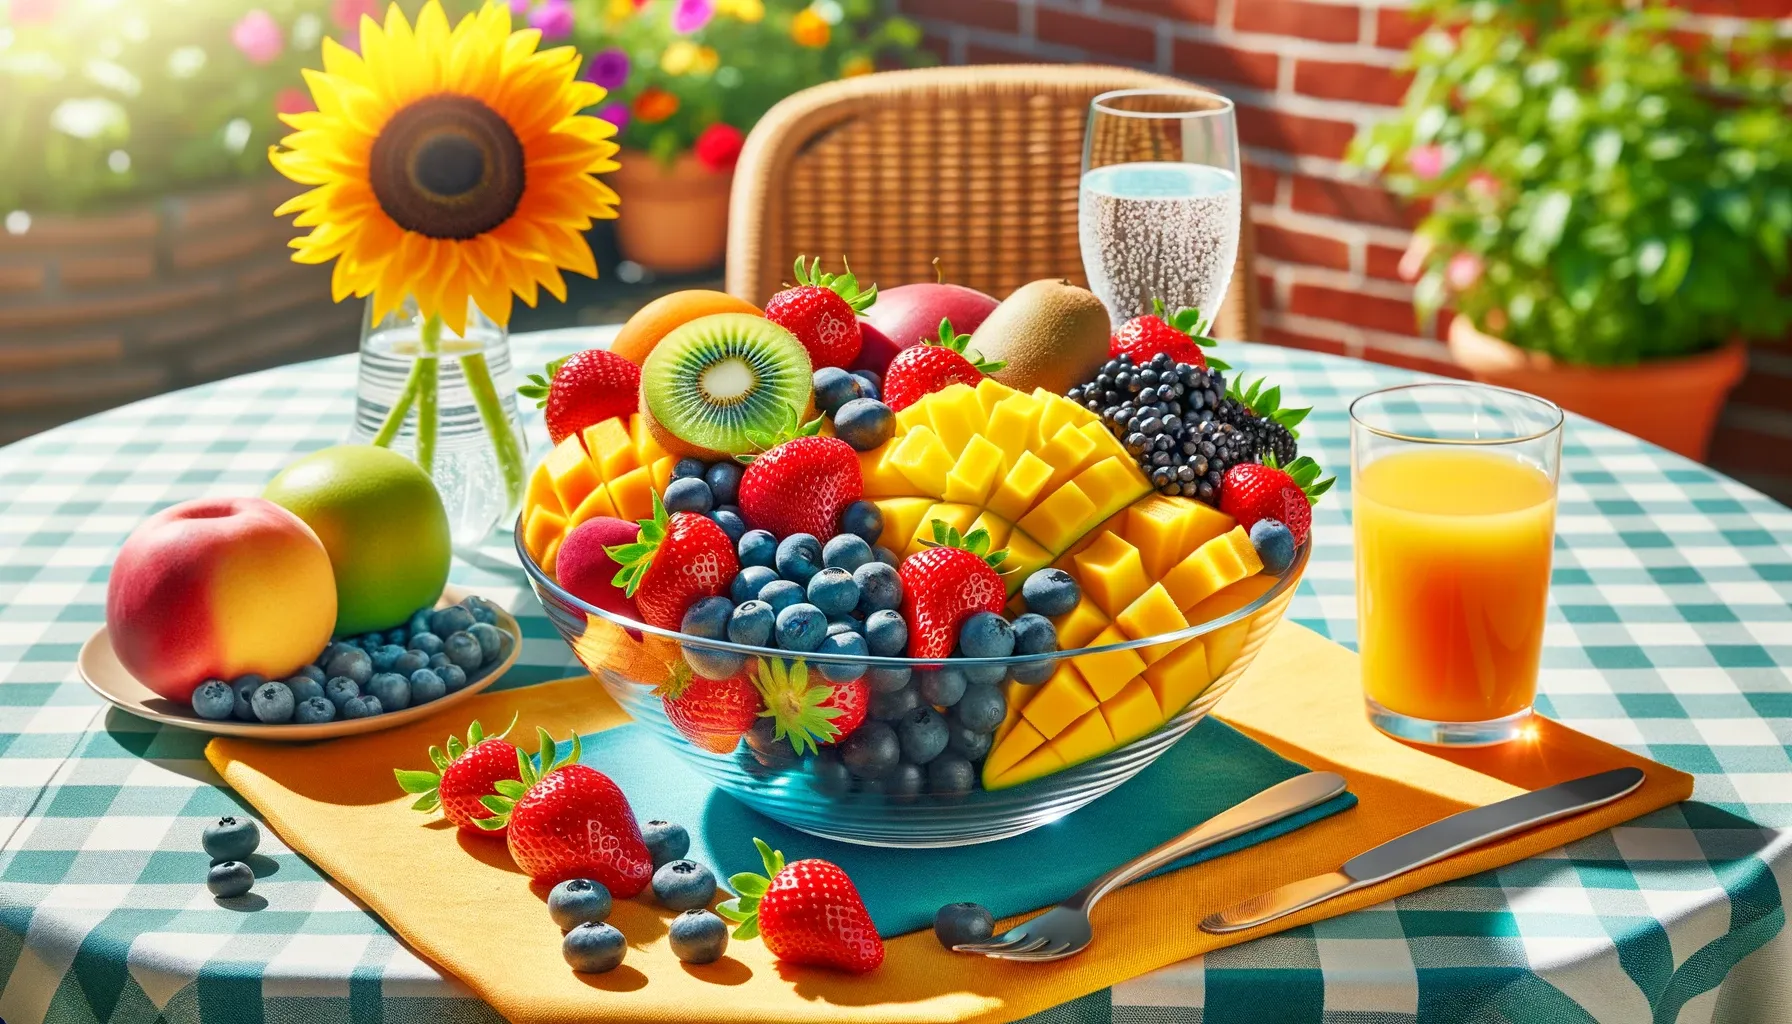 Vibrant fruit bowl on a sunlit outdoor patio table.